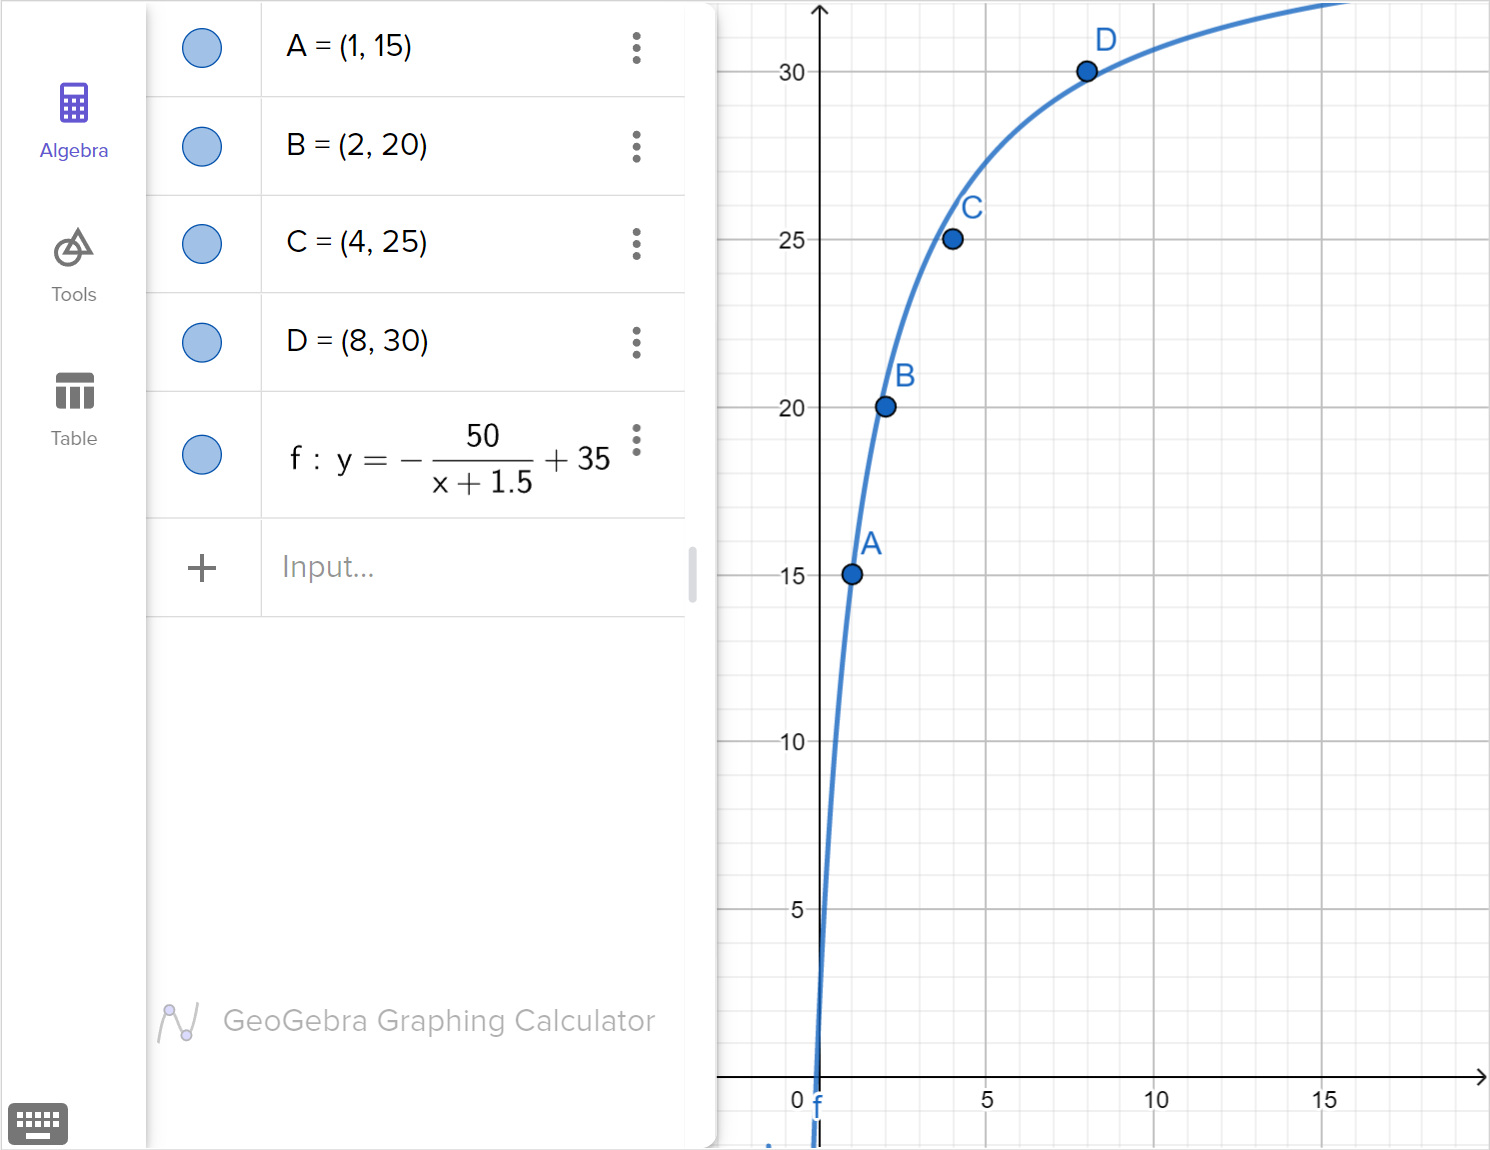 A screenshot of the GeoGebra graphing calculator showing the points A at (1,15), B at (2, 20), C at (4, 25), D at (8,30), and the graph of y equals negative 50 over x plus 1.5 plus 35. Speak to your teacher for more details.